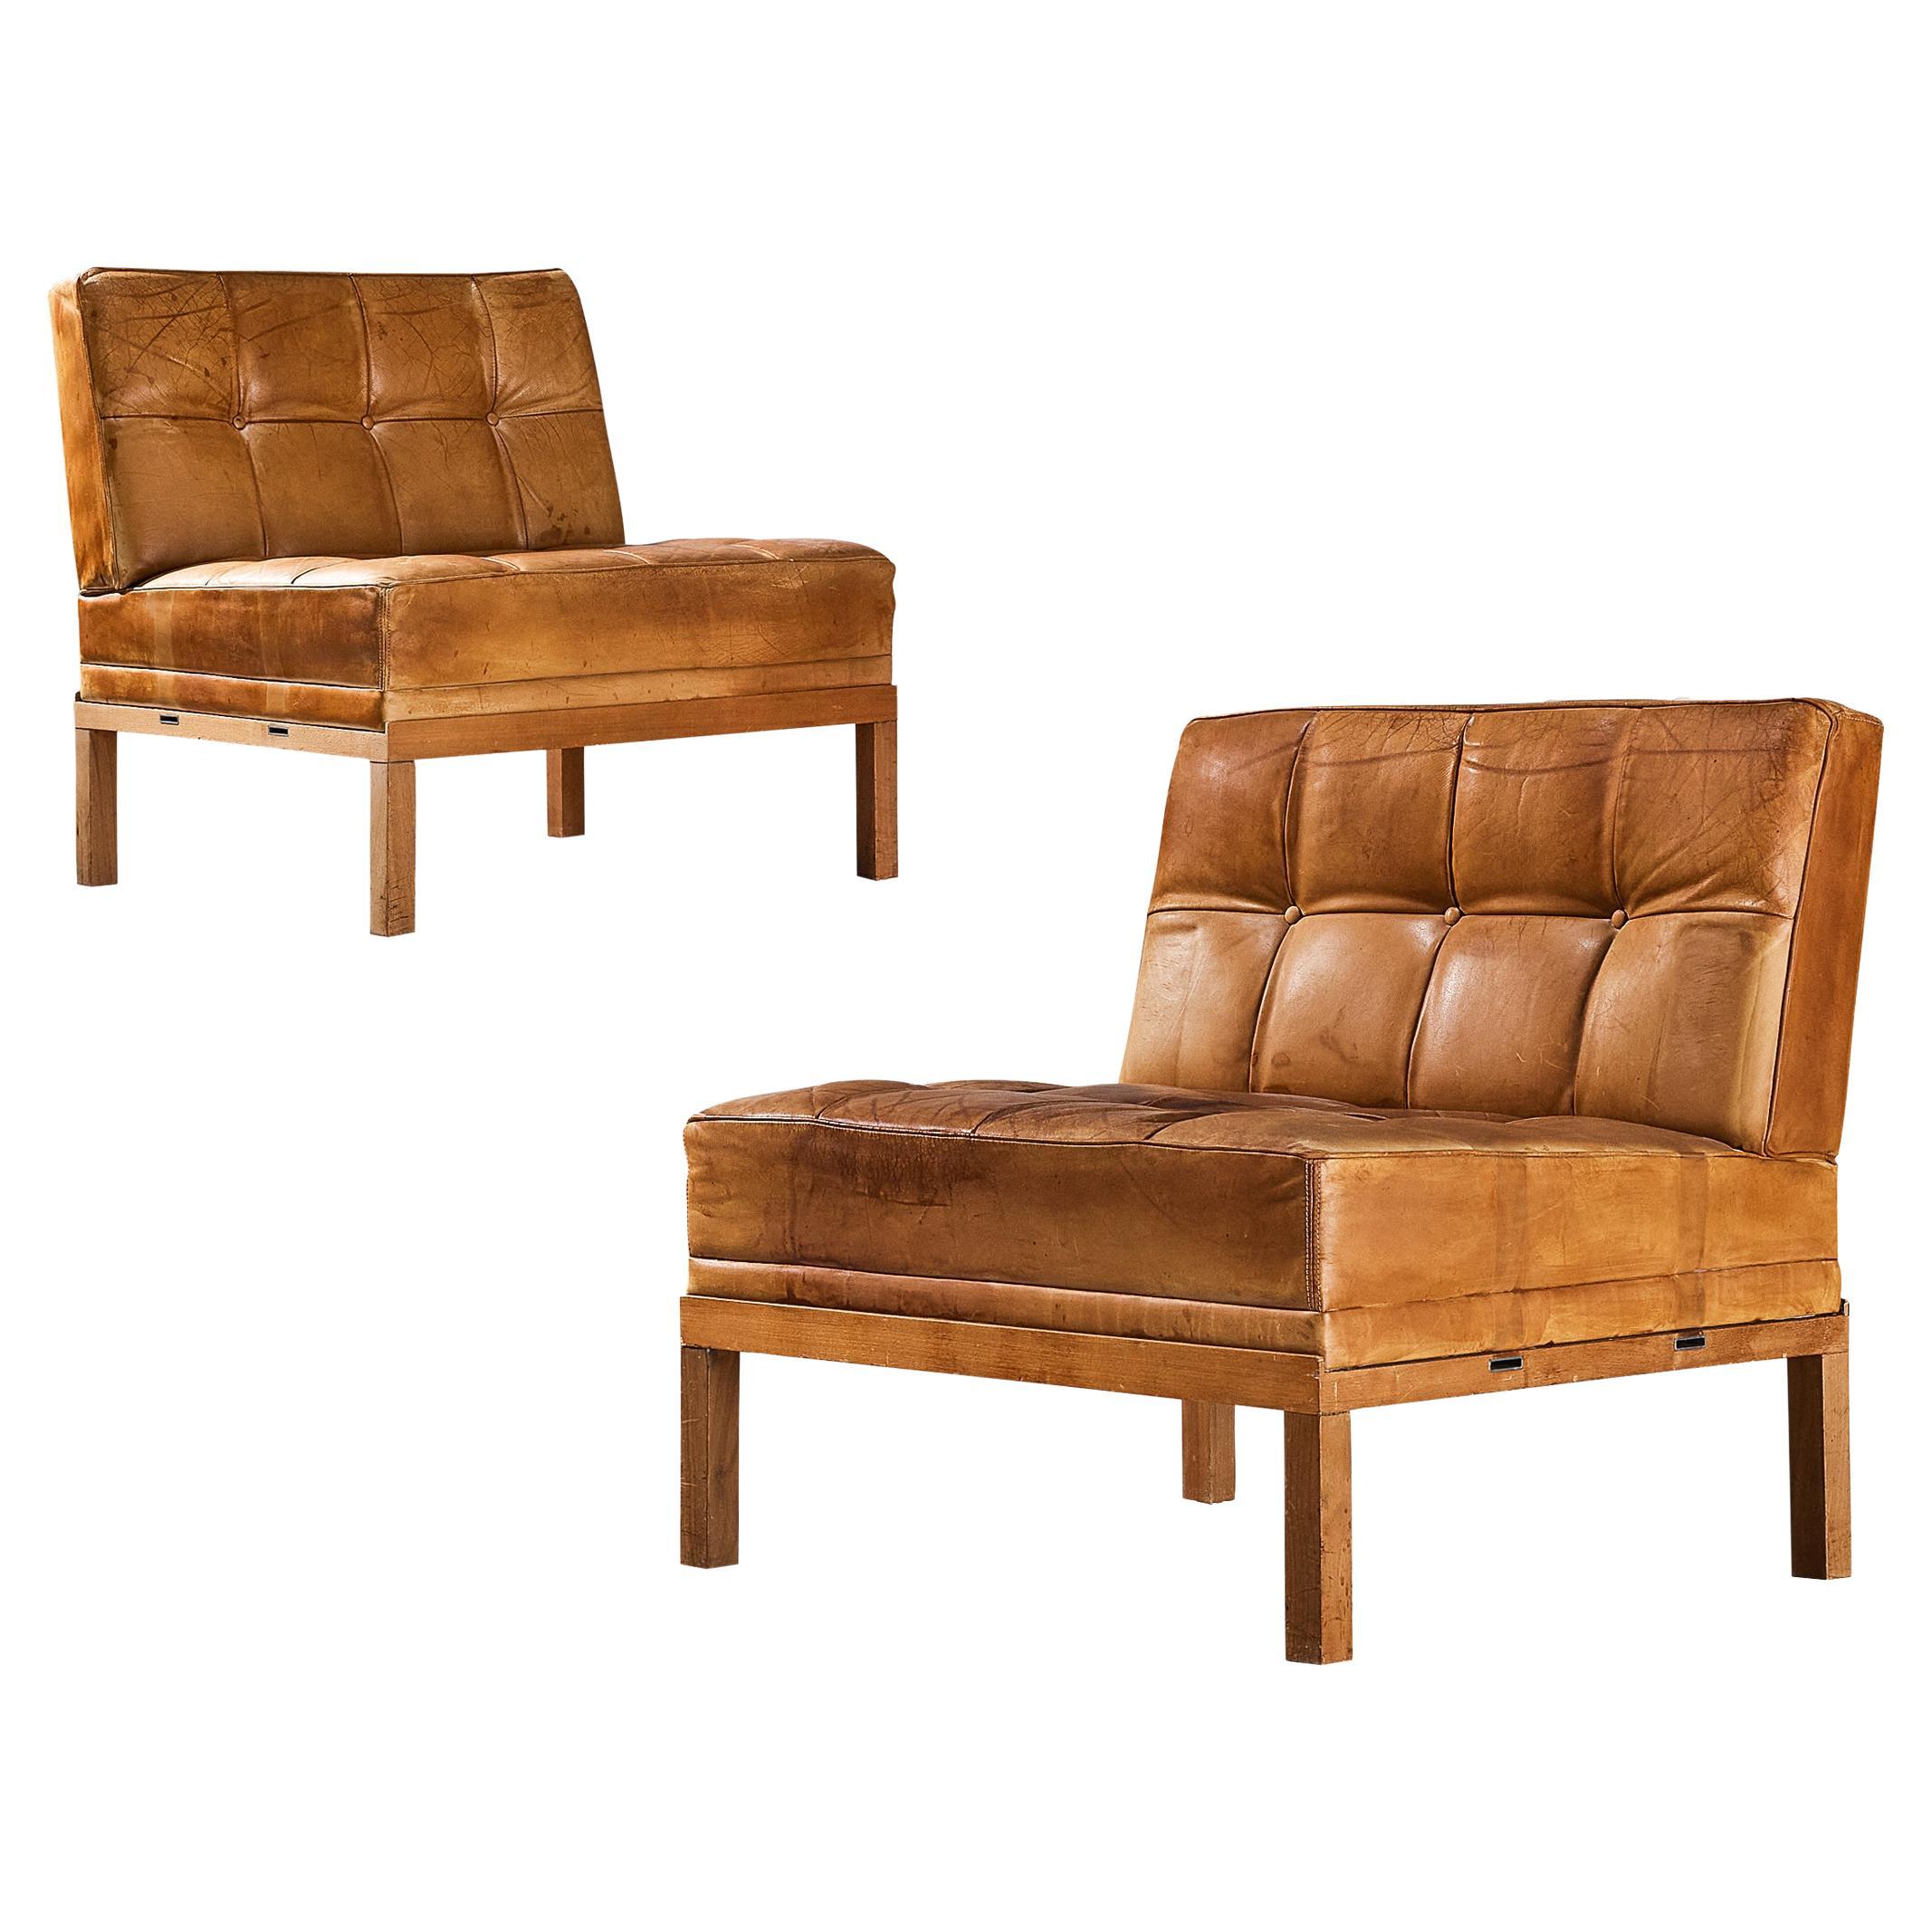 Johannes Spalt for Wittmann Pair of Lounge Chairs in Cognac Leather